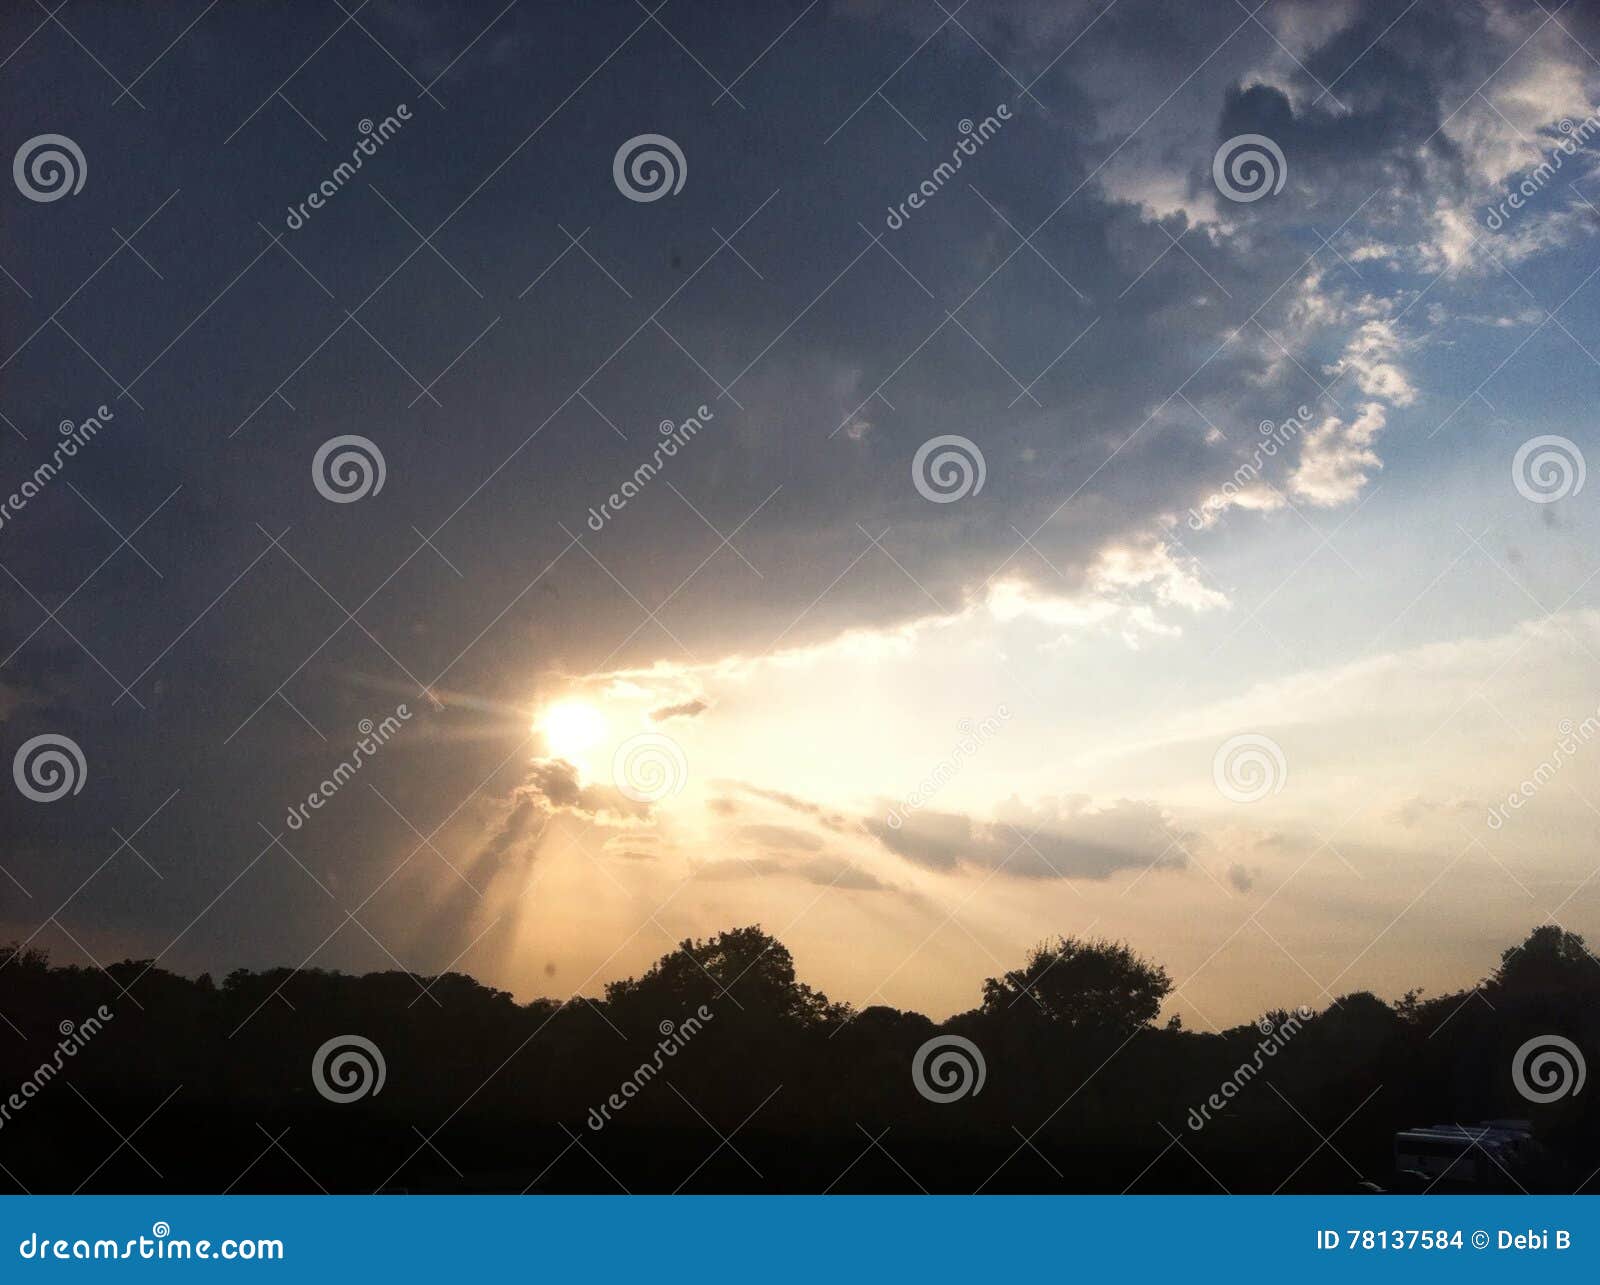 Hole In The Floor Of Heaven Stock Photo Image Of Cloudy Floor